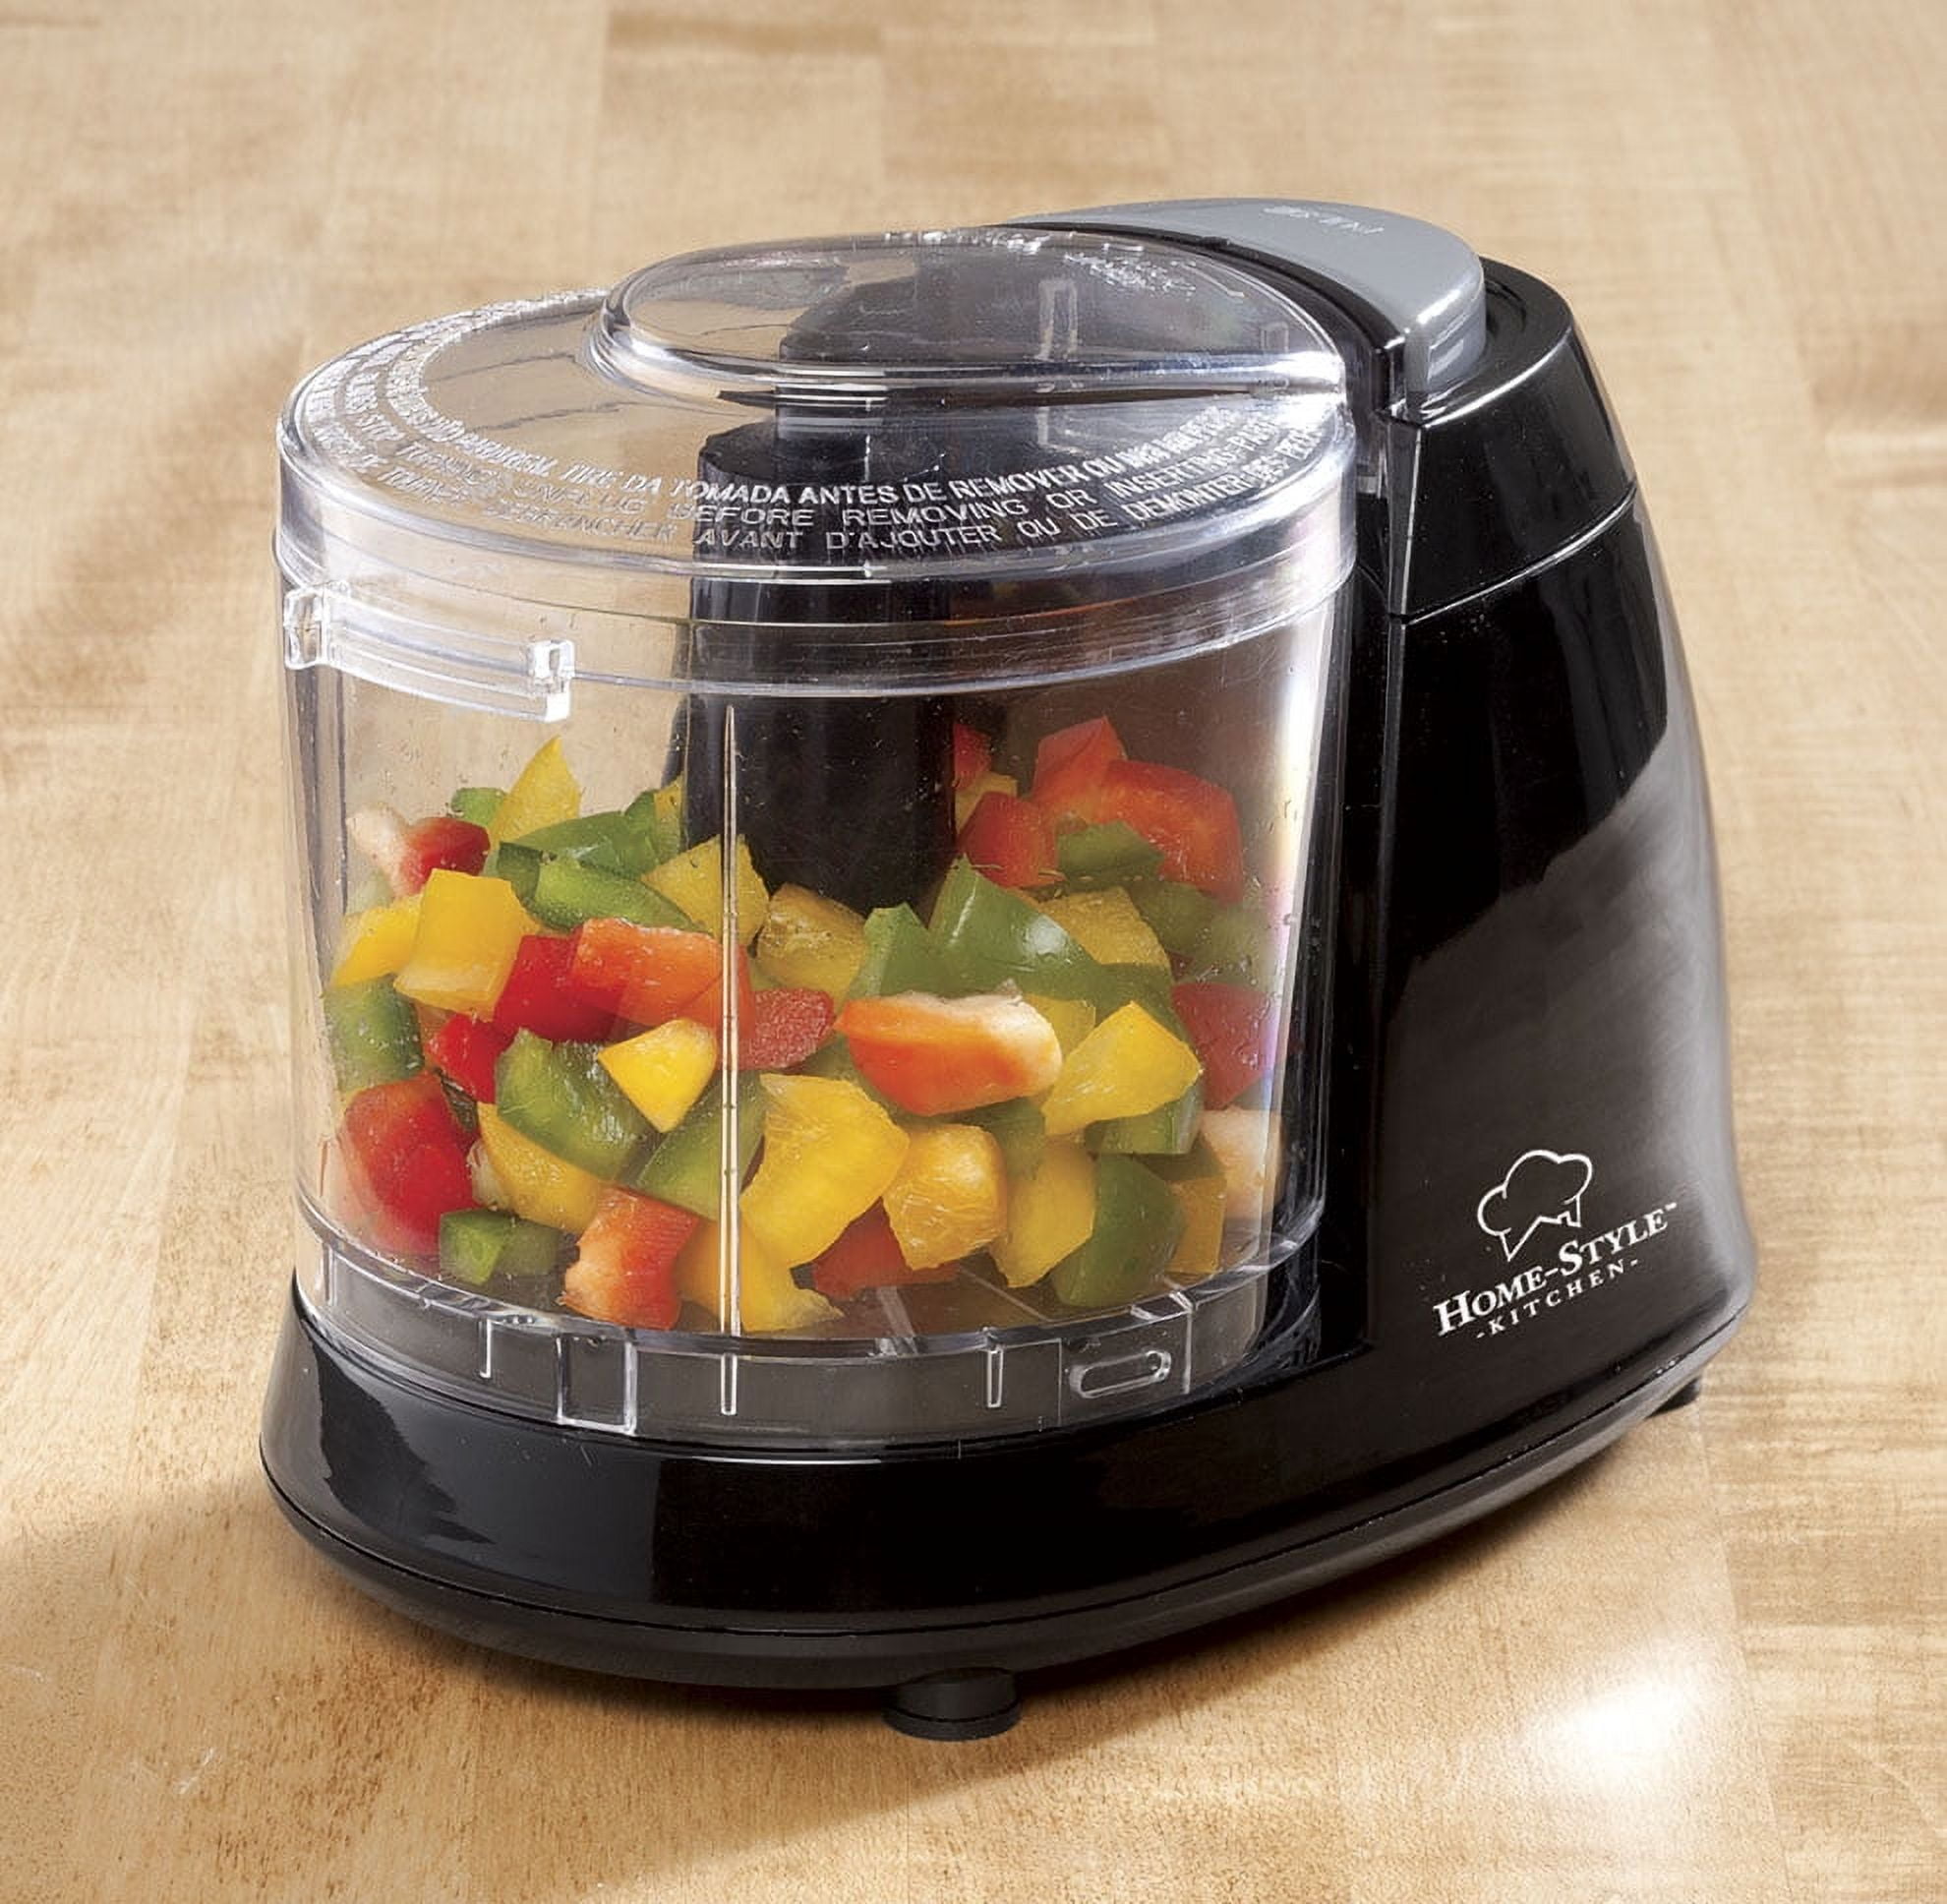 Top 10 Best Small Electric Food Choppers (2021 Reviews) - Brand